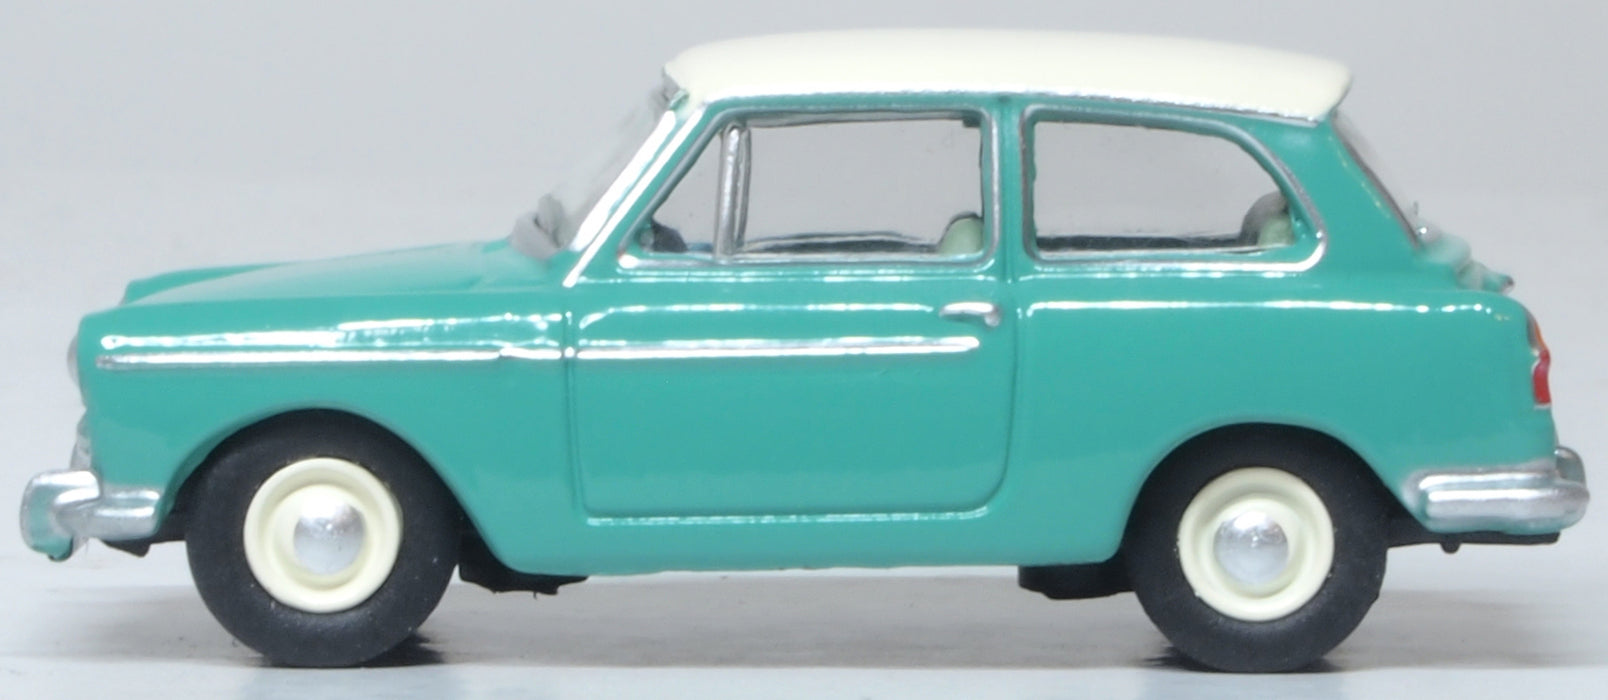 Model of the Austin A40 MkII Fern Green/Snowberry White by Oxford at 1:76 scale.